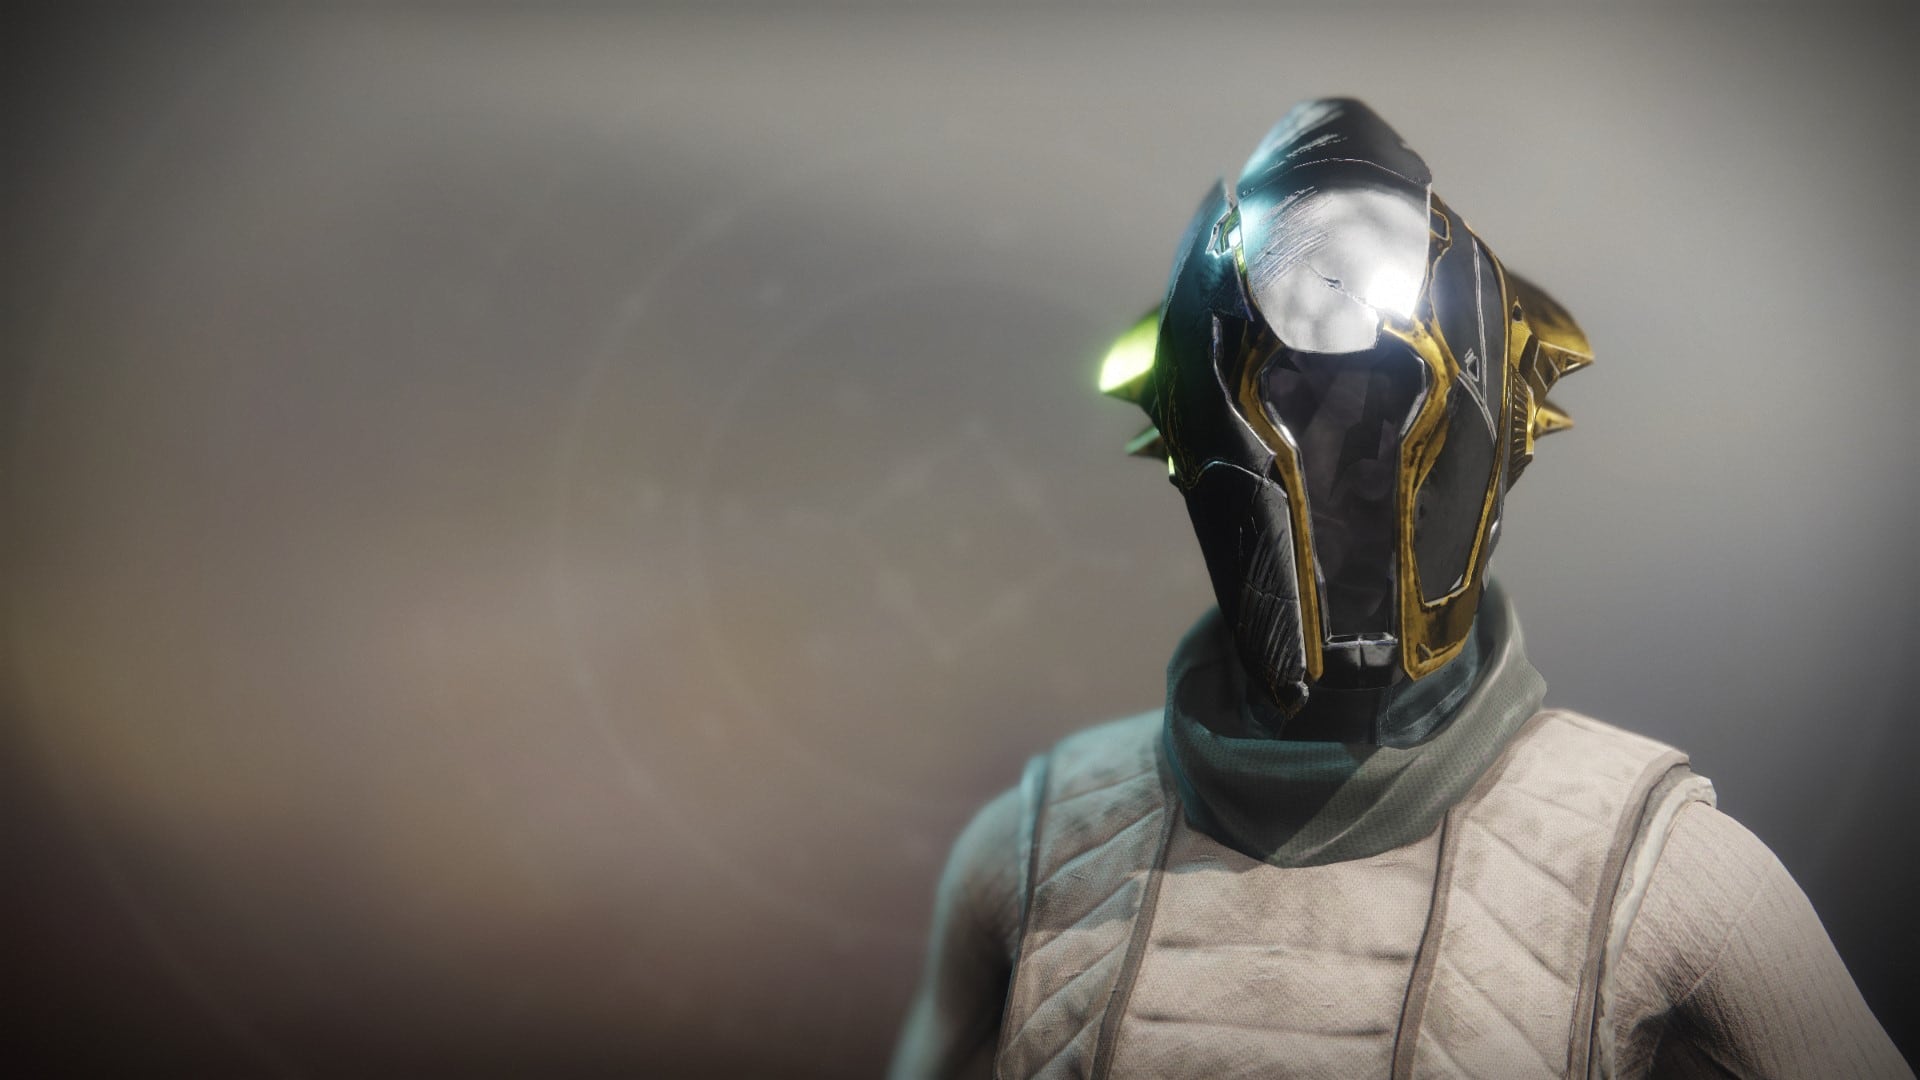 An in-game render of the Solstice Hood (Drained).